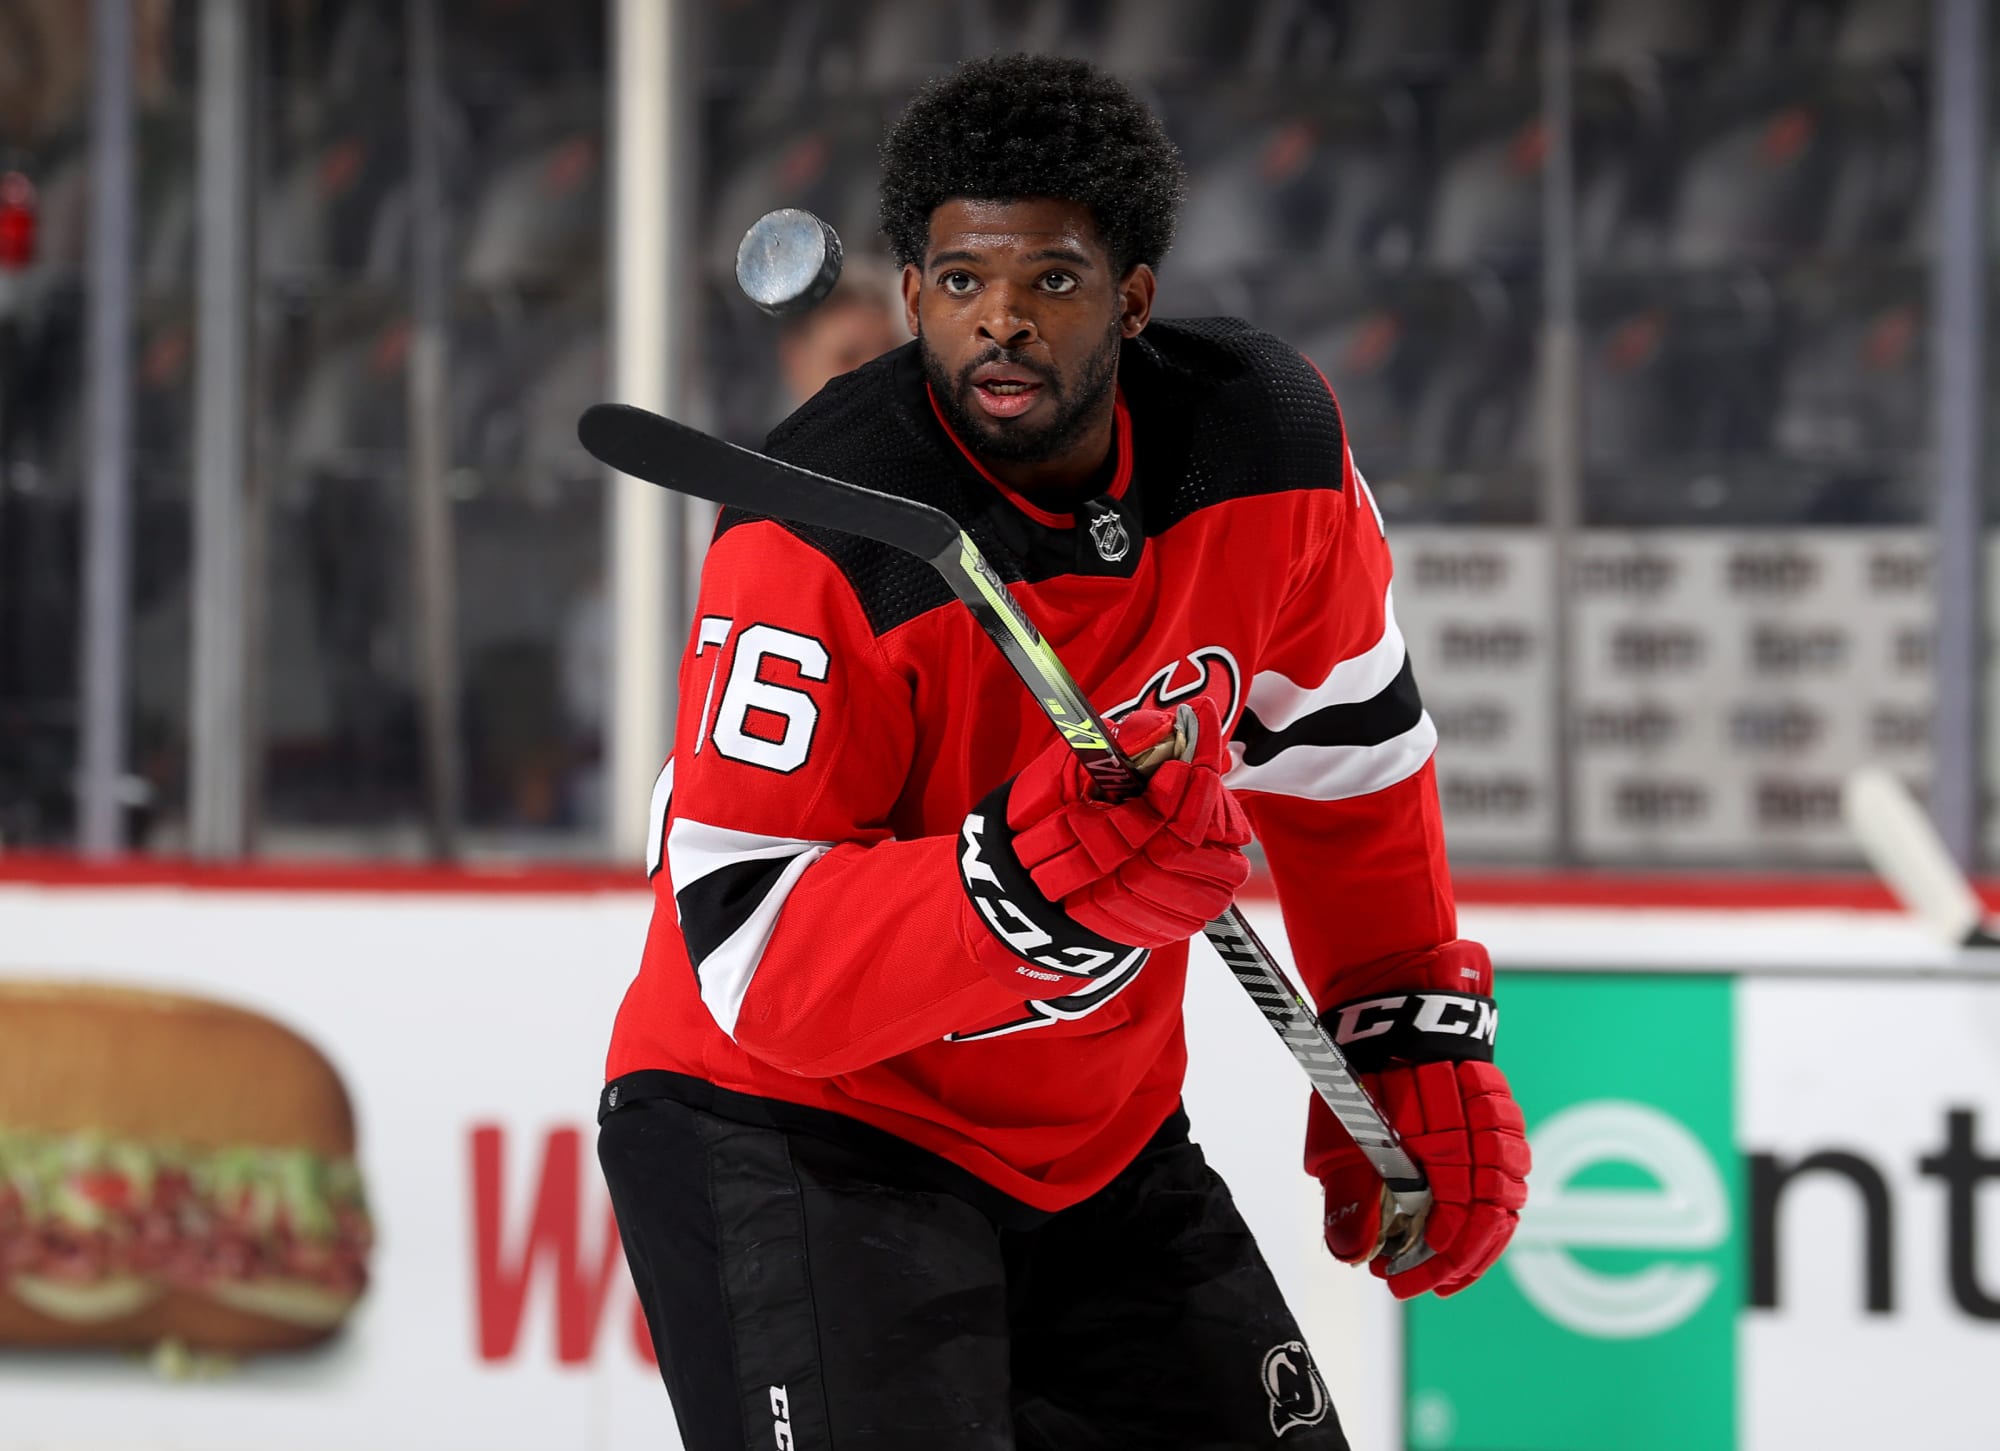 What's next for P.K. Subban?